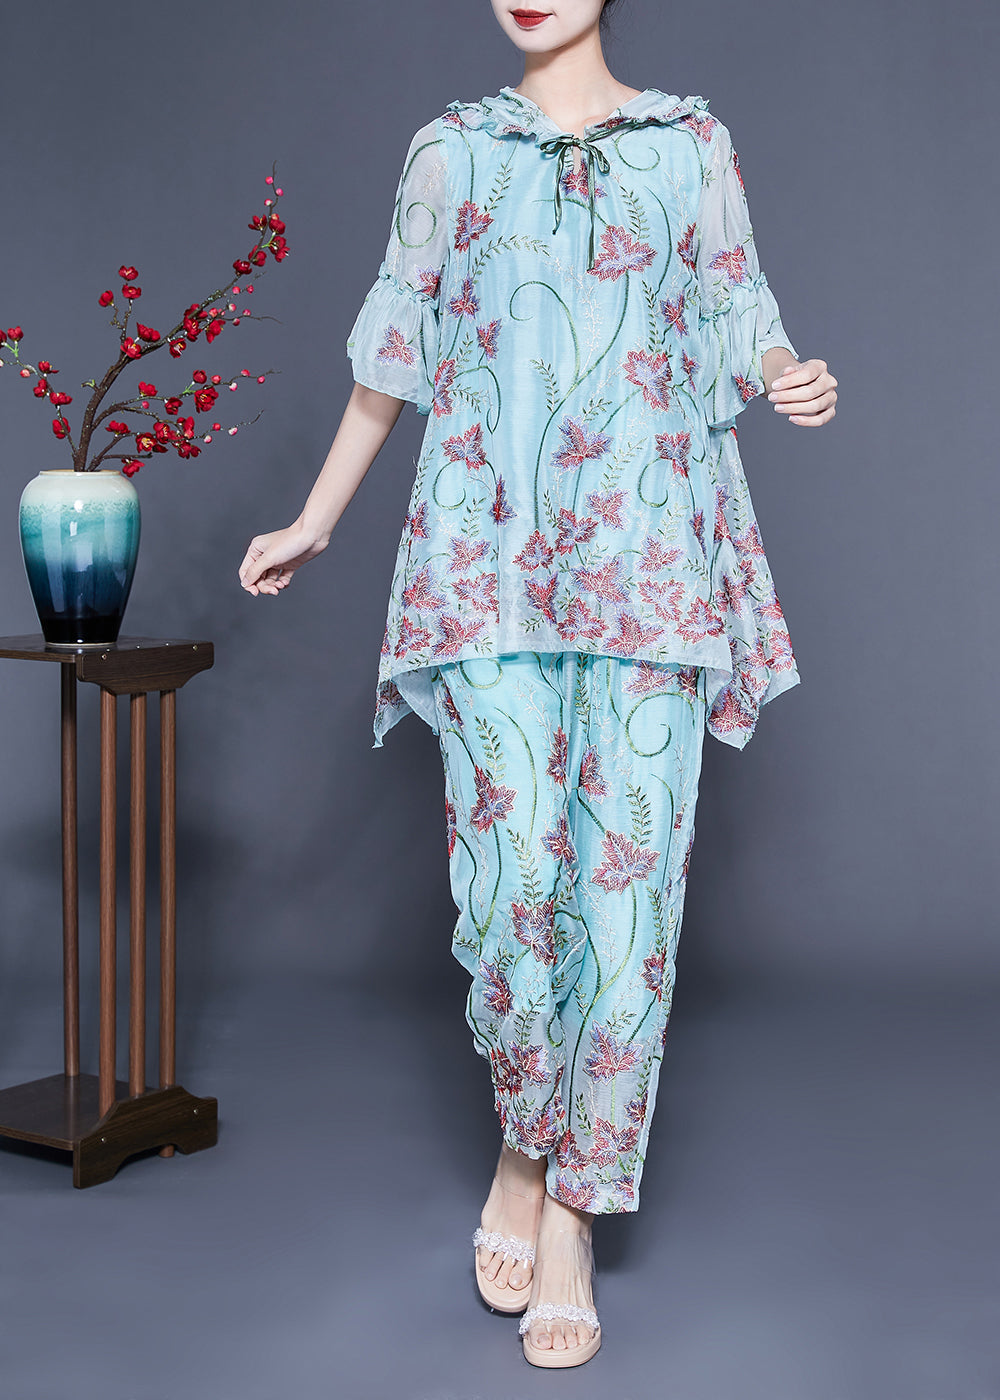 peopleterritory Chic Light Blue Hooded Ruffled Embroideried Silk Two Pieces Set Flare Sleeve LY1135